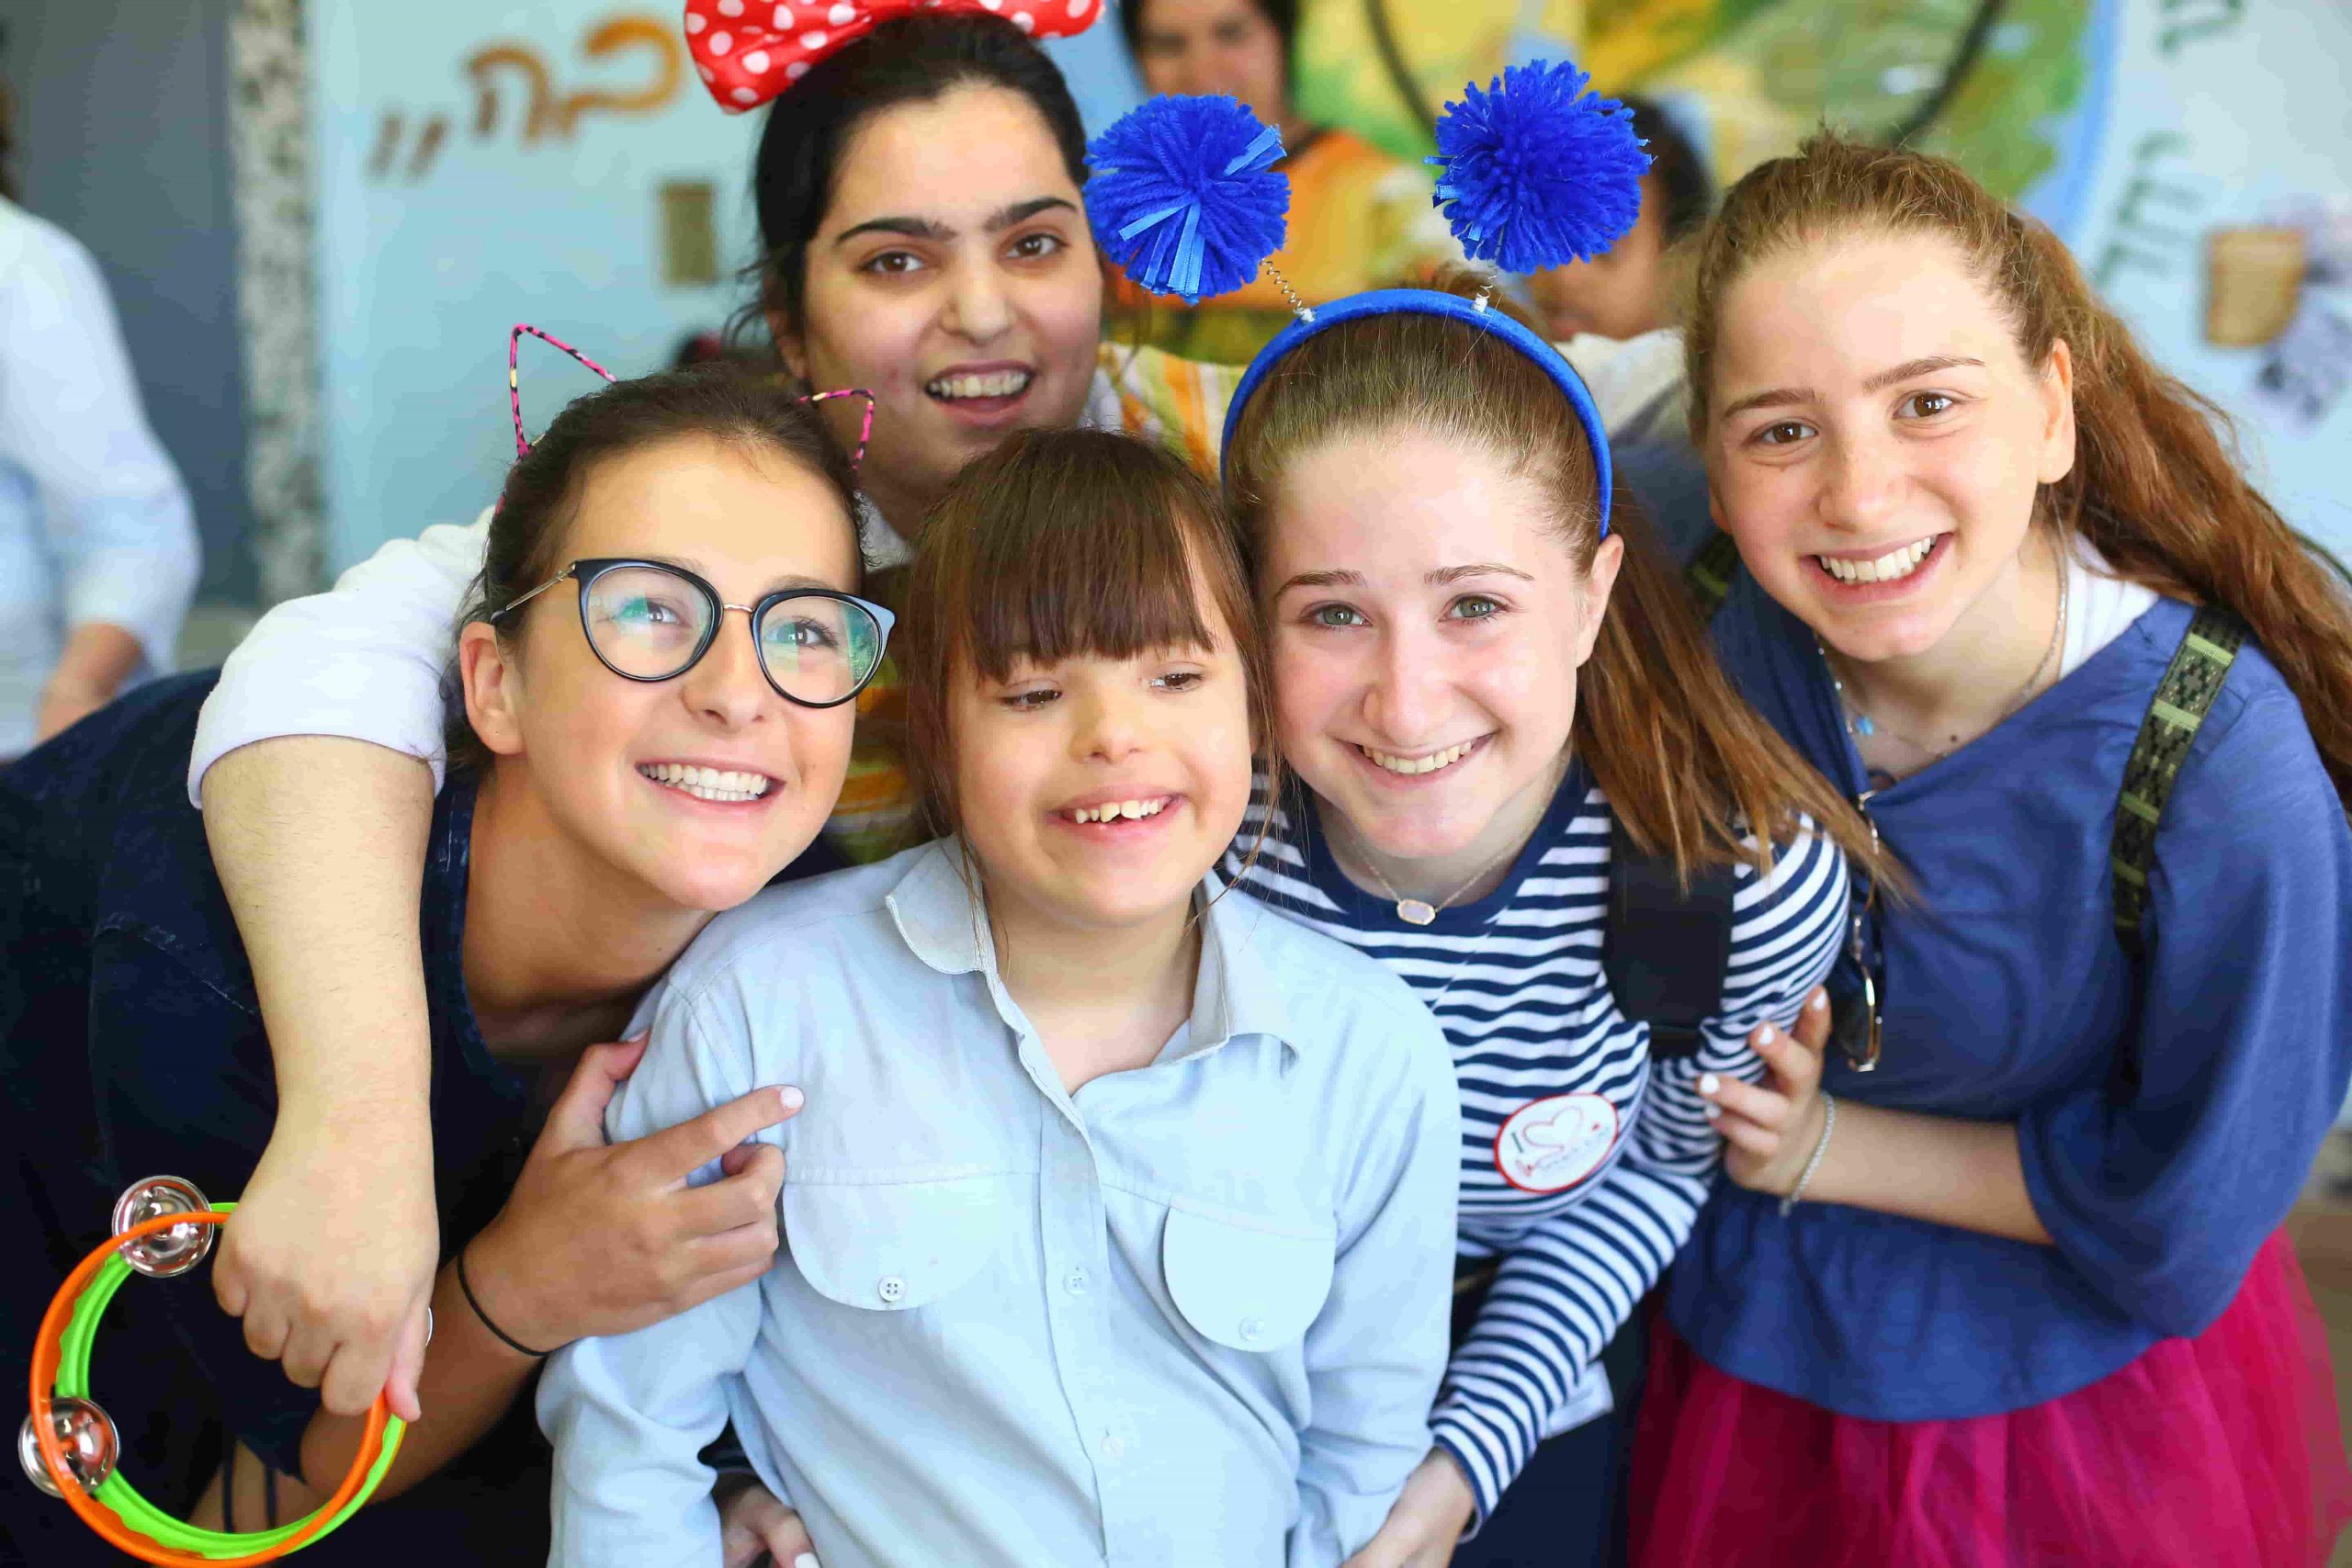 Play with the children at Shalva